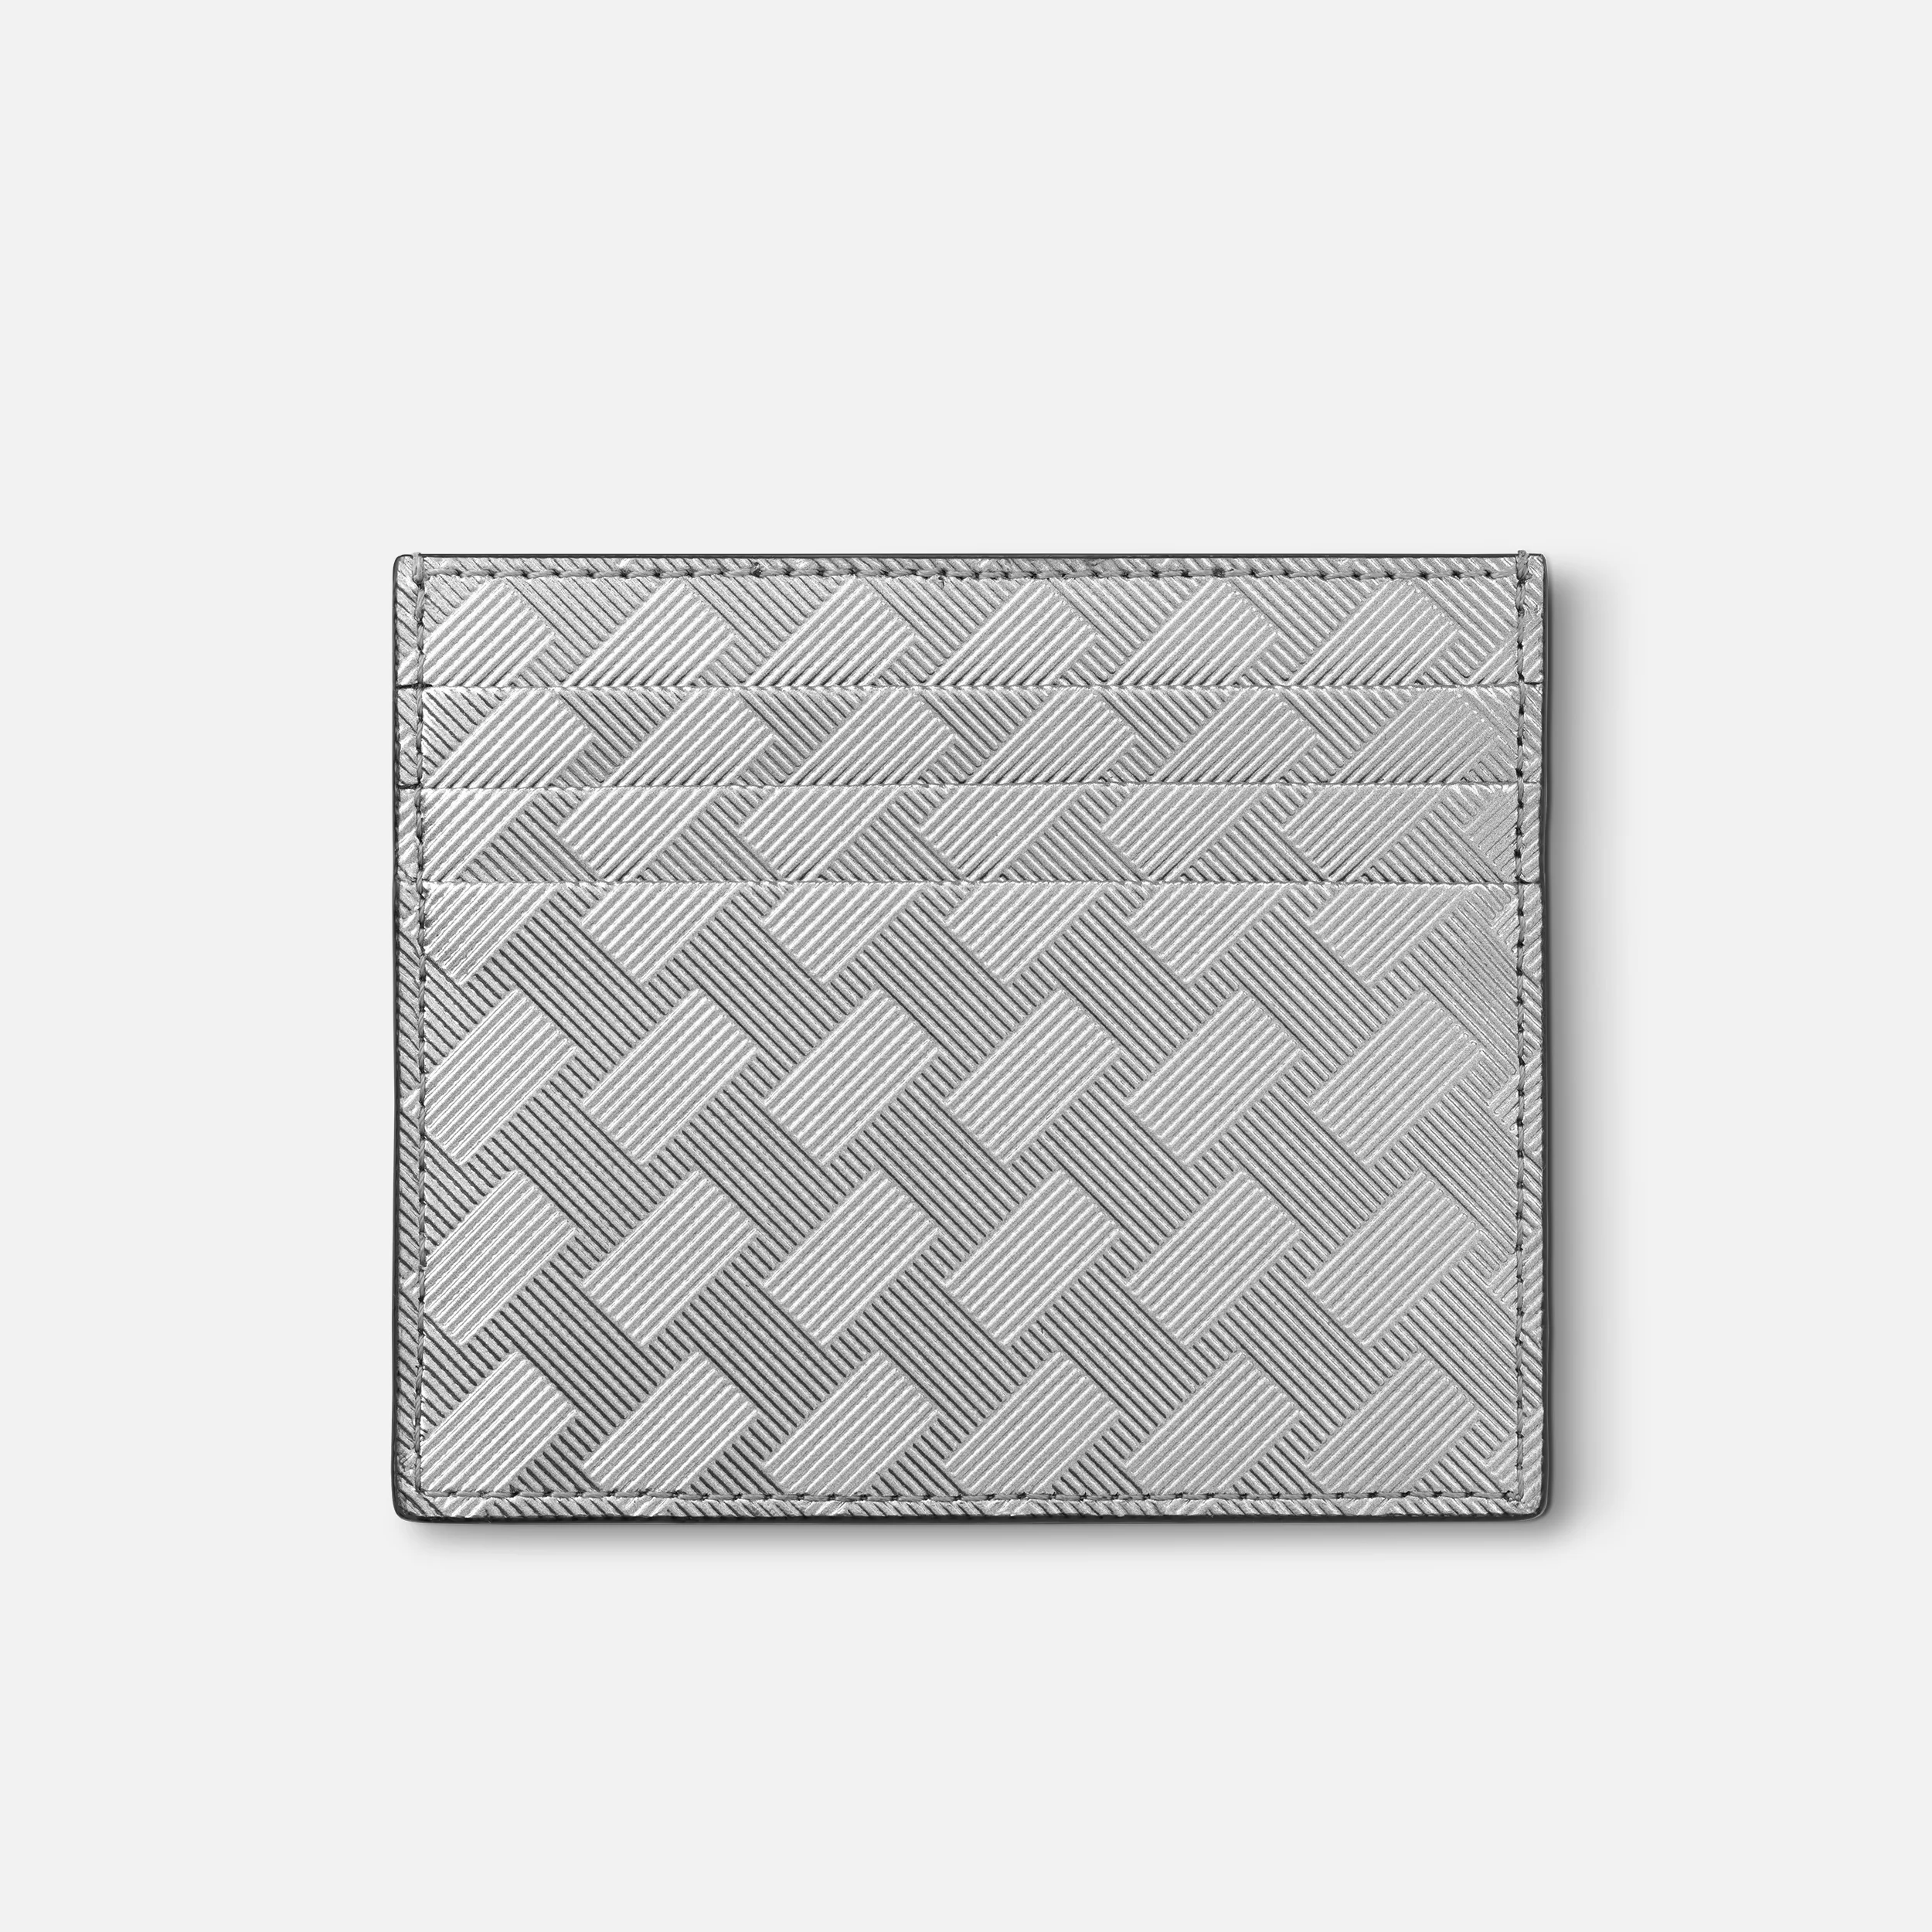 Montblanc Extreme 3.0 Card Holder 6cc Silver - Pencraft the boutique